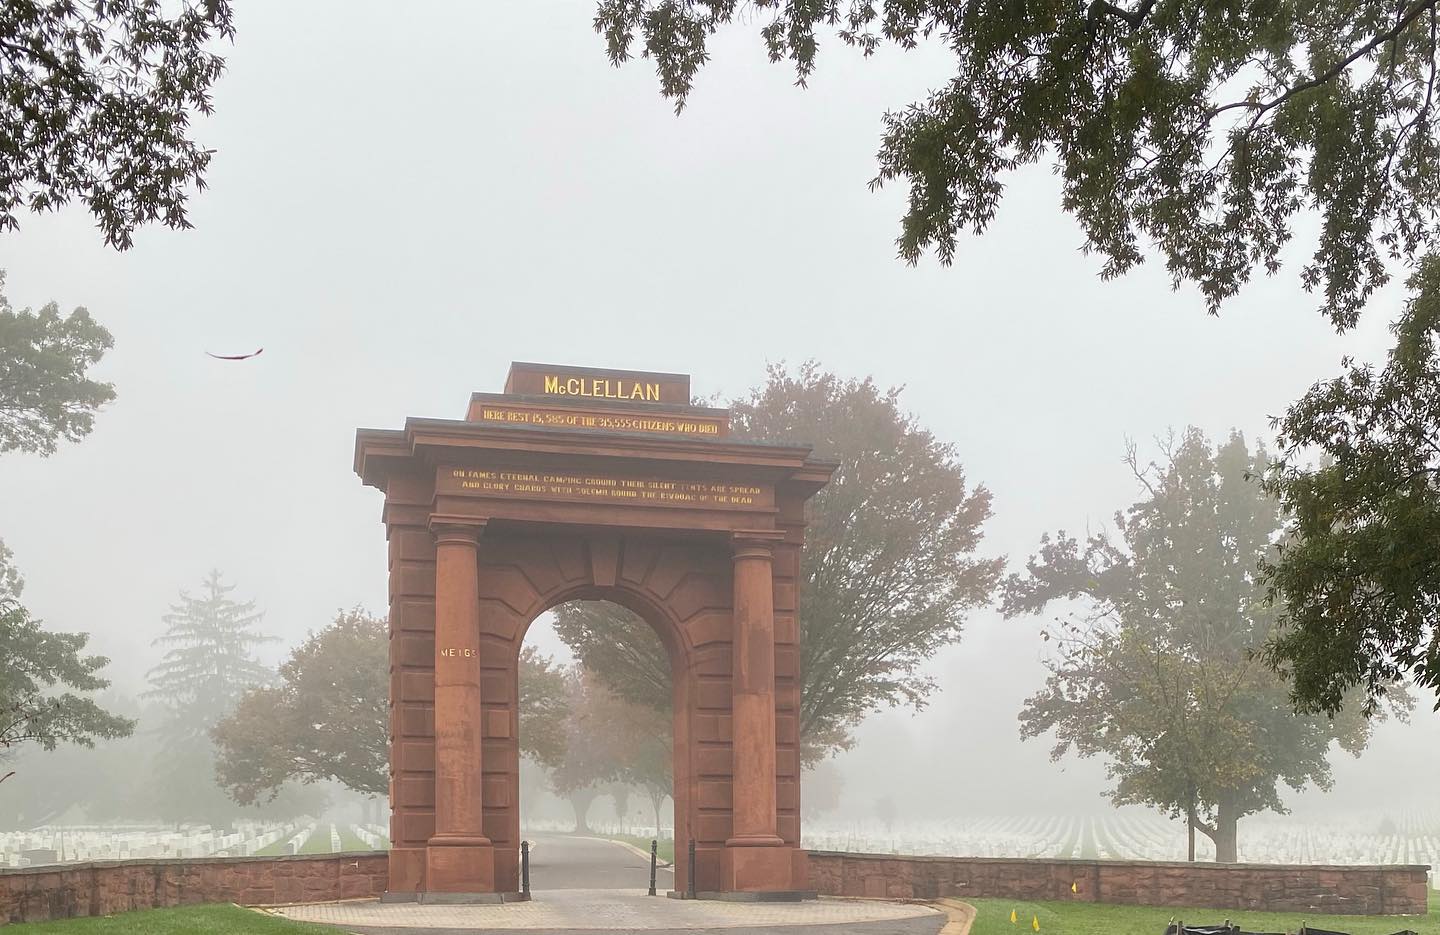 McClellan Gate can be seen standing erect amidst the early morning fog at Arlington National Cemetery in Arlington, Virginia. 

McClellan Gate marks the original entrance to Arlington National Cemetery. Named for Civil War General George B. McClellan, the reddish-brown archway remains one of the cemetery's most iconic landmarks, towering 30 feet above the ground. Atop the arch facing east, the name "McClellan" is inscribed in gold, above lines from Theodore O'Hara's poem 

“Bivouac of the Dead" (1847): 

“On fame's eternal camping ground their silent tents are spread / And glory guards with solemn round, the bivouac of the dead." Other lines from the poem are on the west-facing arch: "Rest on embalmed and sainted dead, dear as the blood ye gave / No impious footsteps here shall tread on the herbage of your grave." 

Like McClellan, O'Hara fought in the Mexican-American War (1846-1848) and wrote the poem to honor fallen soldiers from that conflict. However, "Bivouac of the Dead" became most closely associated with the Civil War, as it appeared on both Union and Confederate monuments during the 1860s.